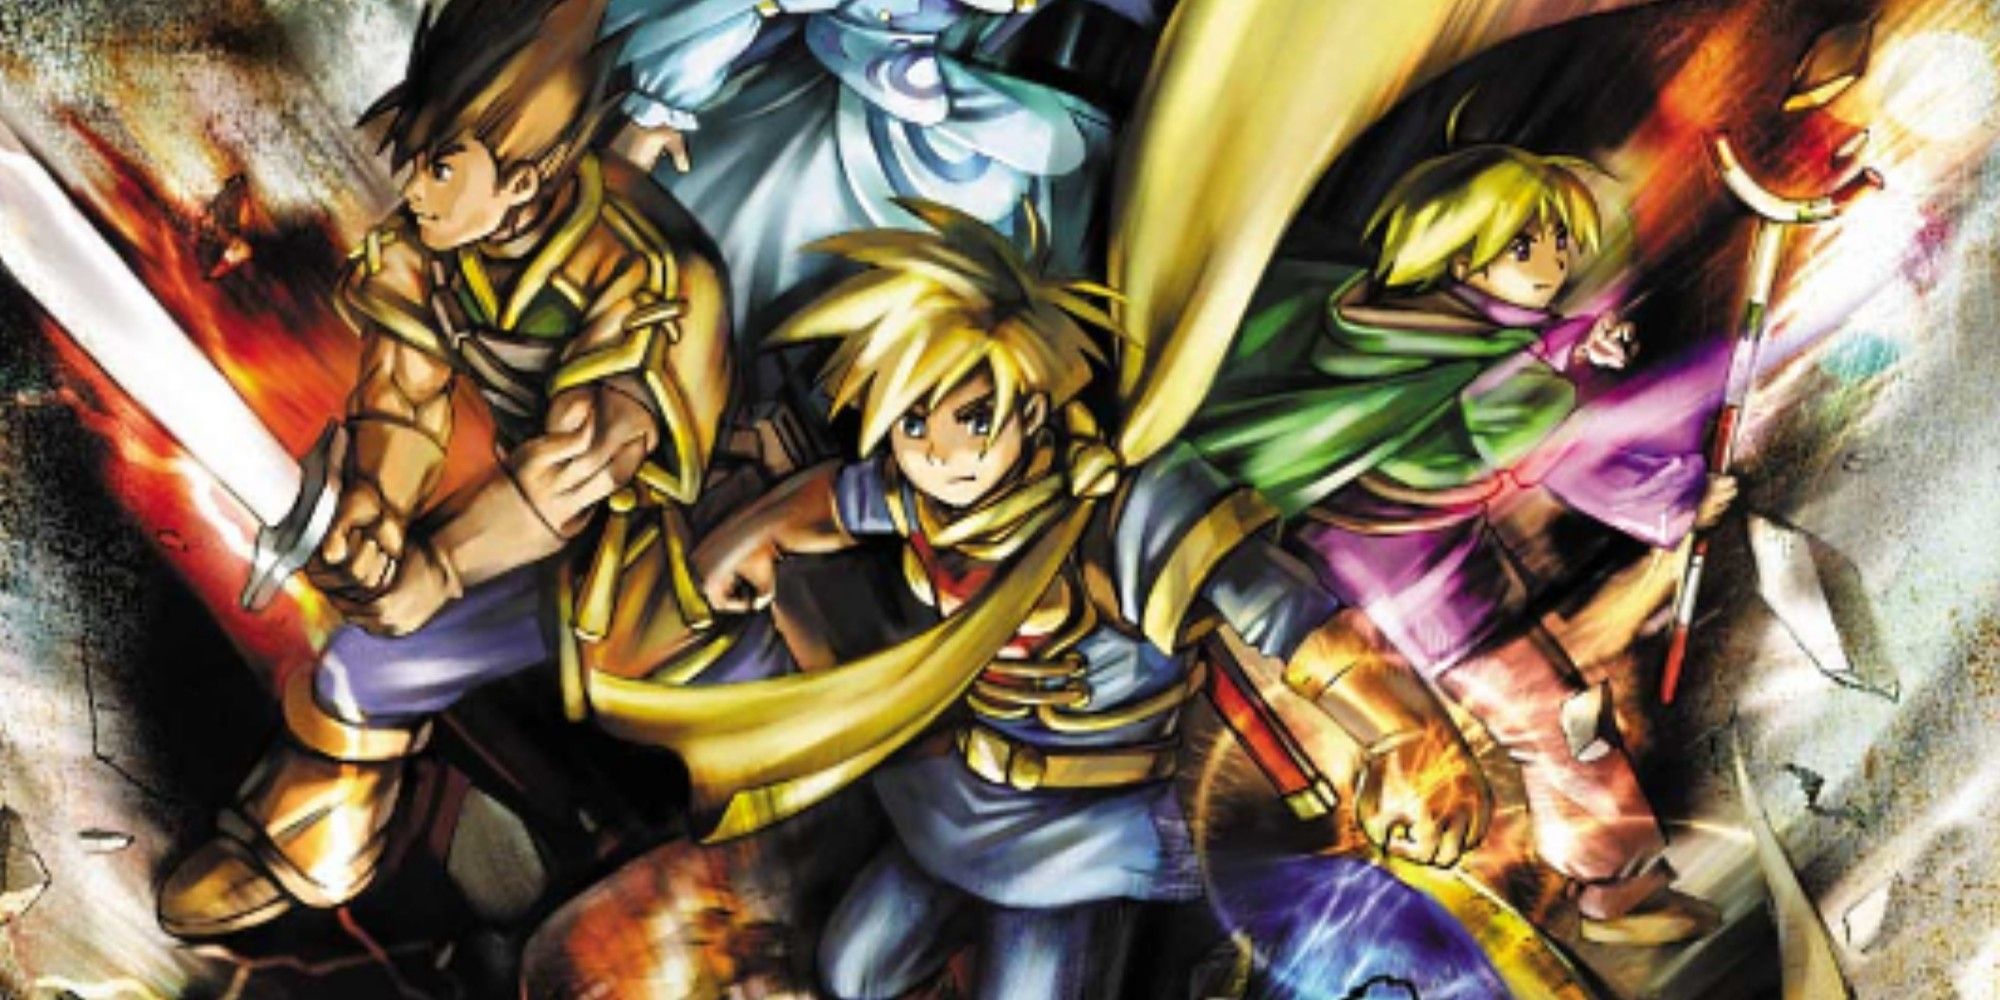 The heroes of Golden Sun caught in a wave of light.